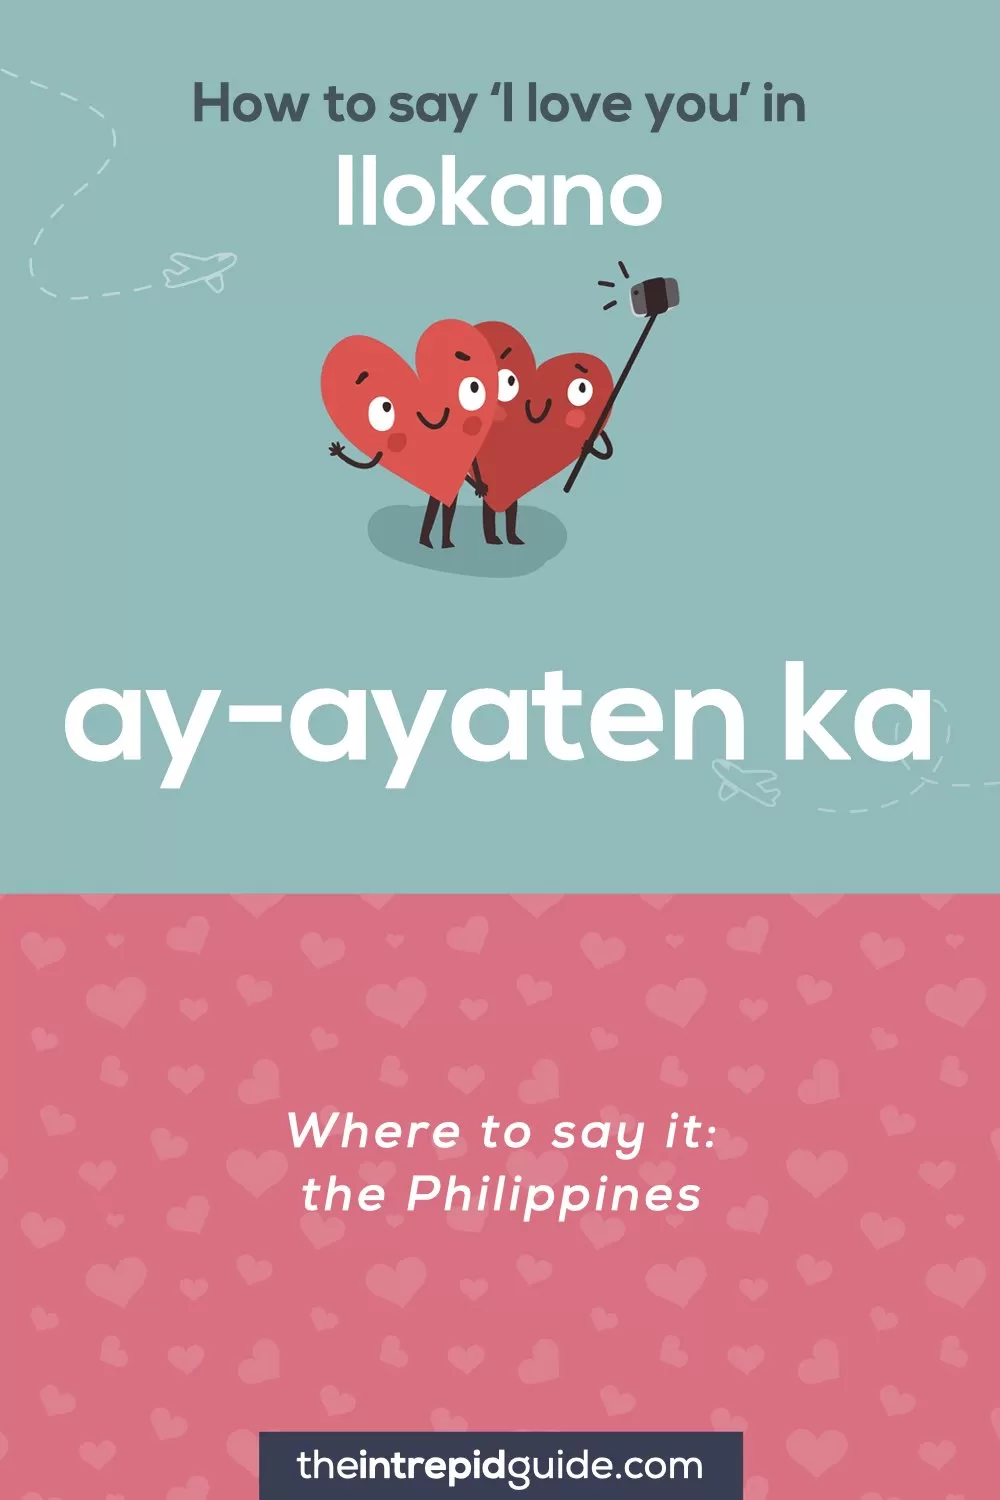 How to say I love you in different languages - Ilokano